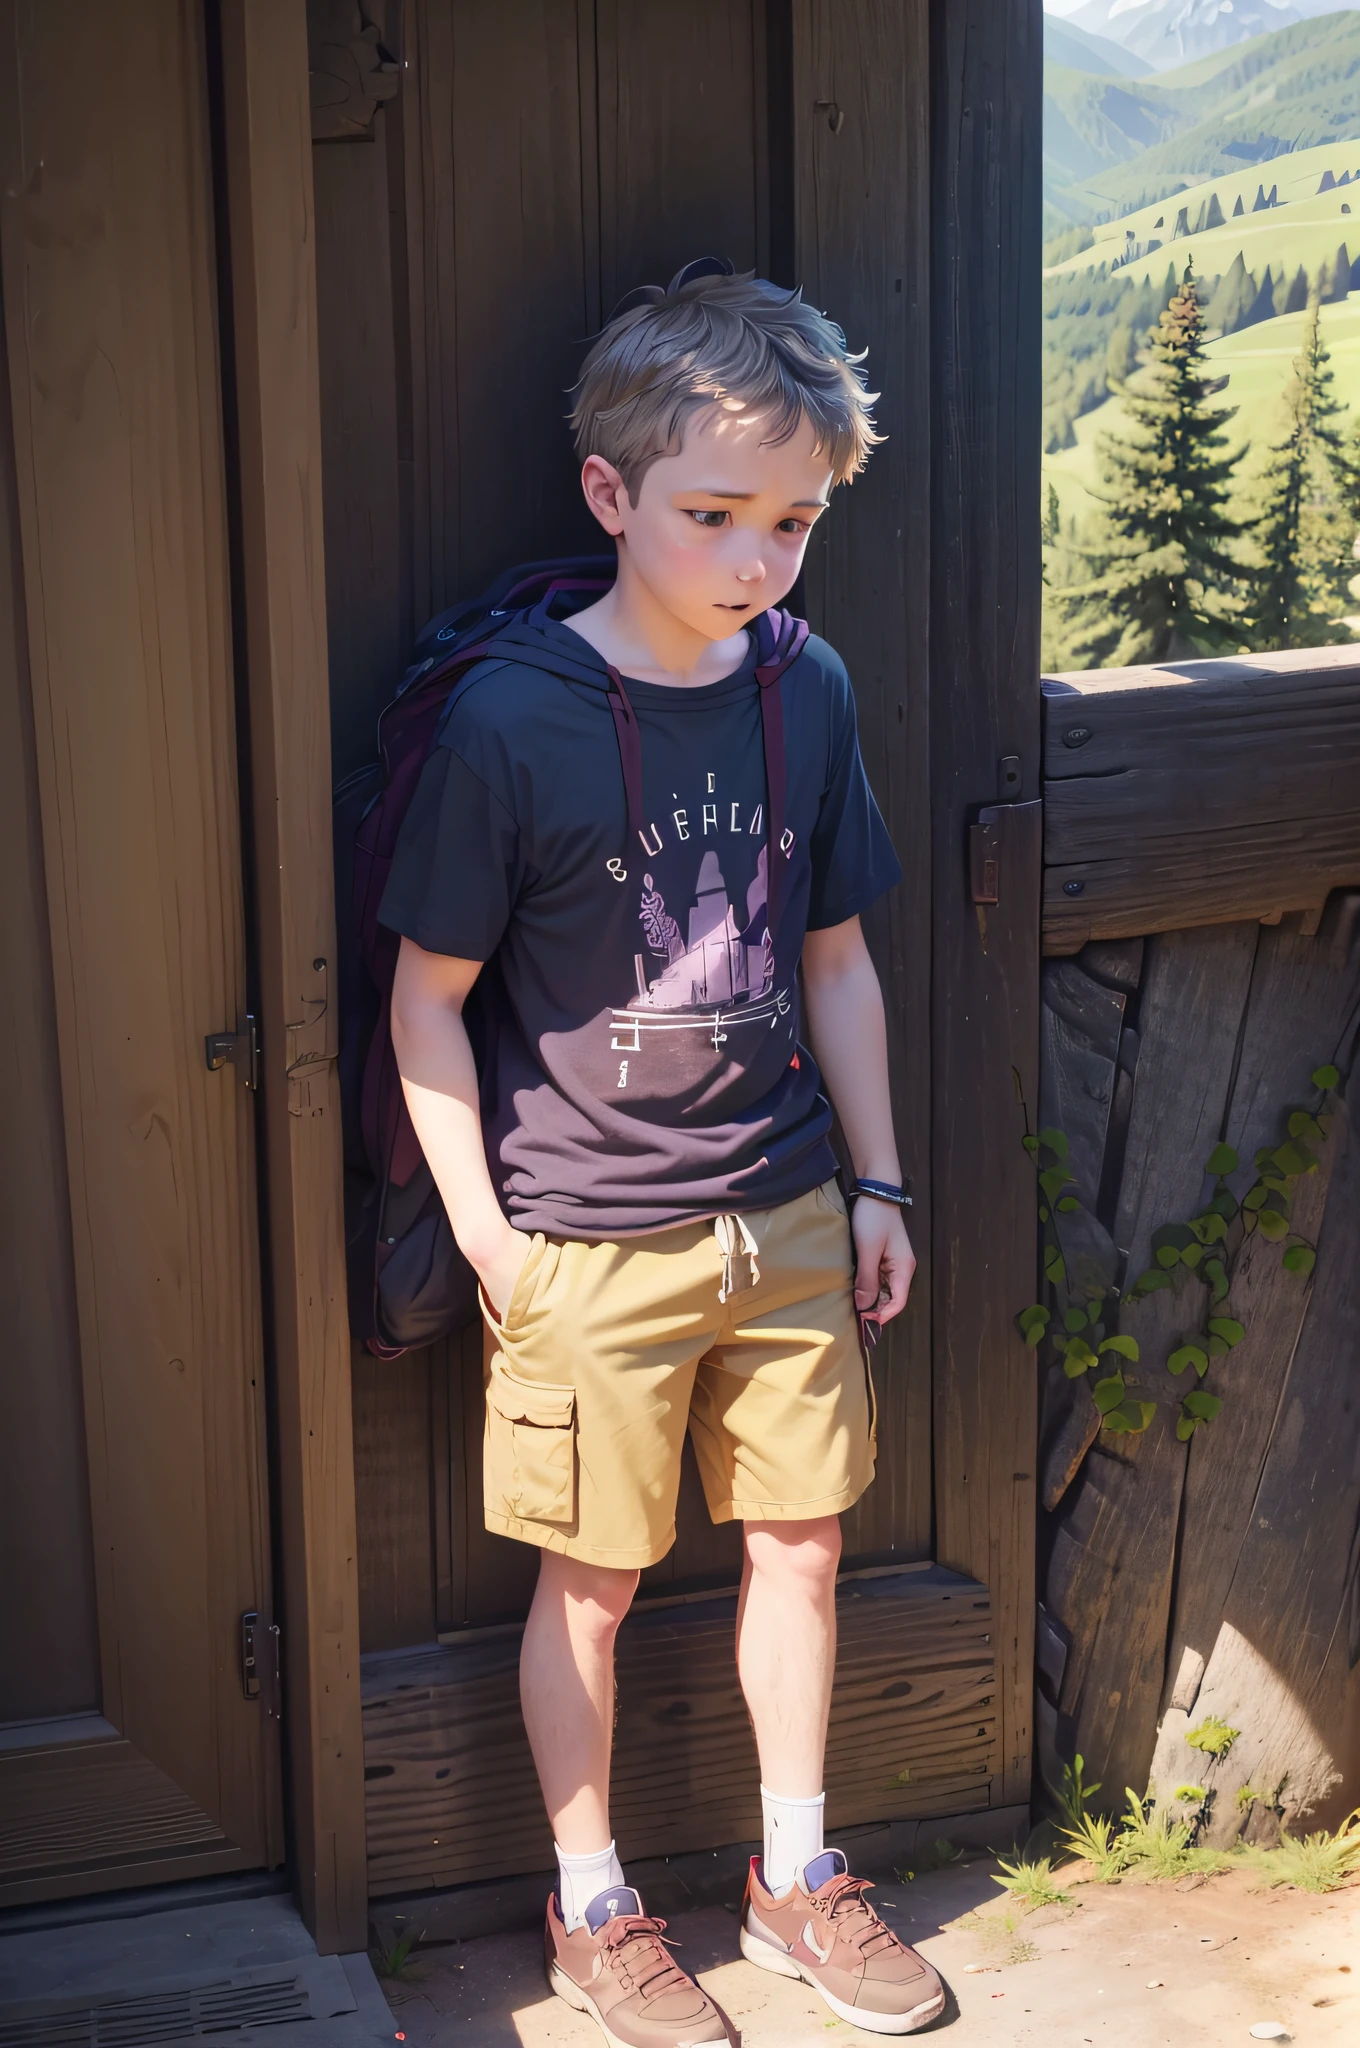 Prompt 3:
NathanLeserman, on the steps of a traditional Swiss school in the Alps, ties his shoelaces. The wooden building, with its carved details and colorful shutters, exudes charm and warmth. His summer attire, a breathable t-shirt and cargo shorts, is perfect for the mountain climate. A purple glow effect surrounds a nearby school bell, signaling the end of a break. Children play in the yard, their laughter echoing in the valley. The scent of pine trees and wildflowers fills the air, creating a serene environment for learning. As Nathan stands up, he takes a moment to admire the panoramic views, with rolling hills, meadows, and distant peaks forming a breathtaking landscape.